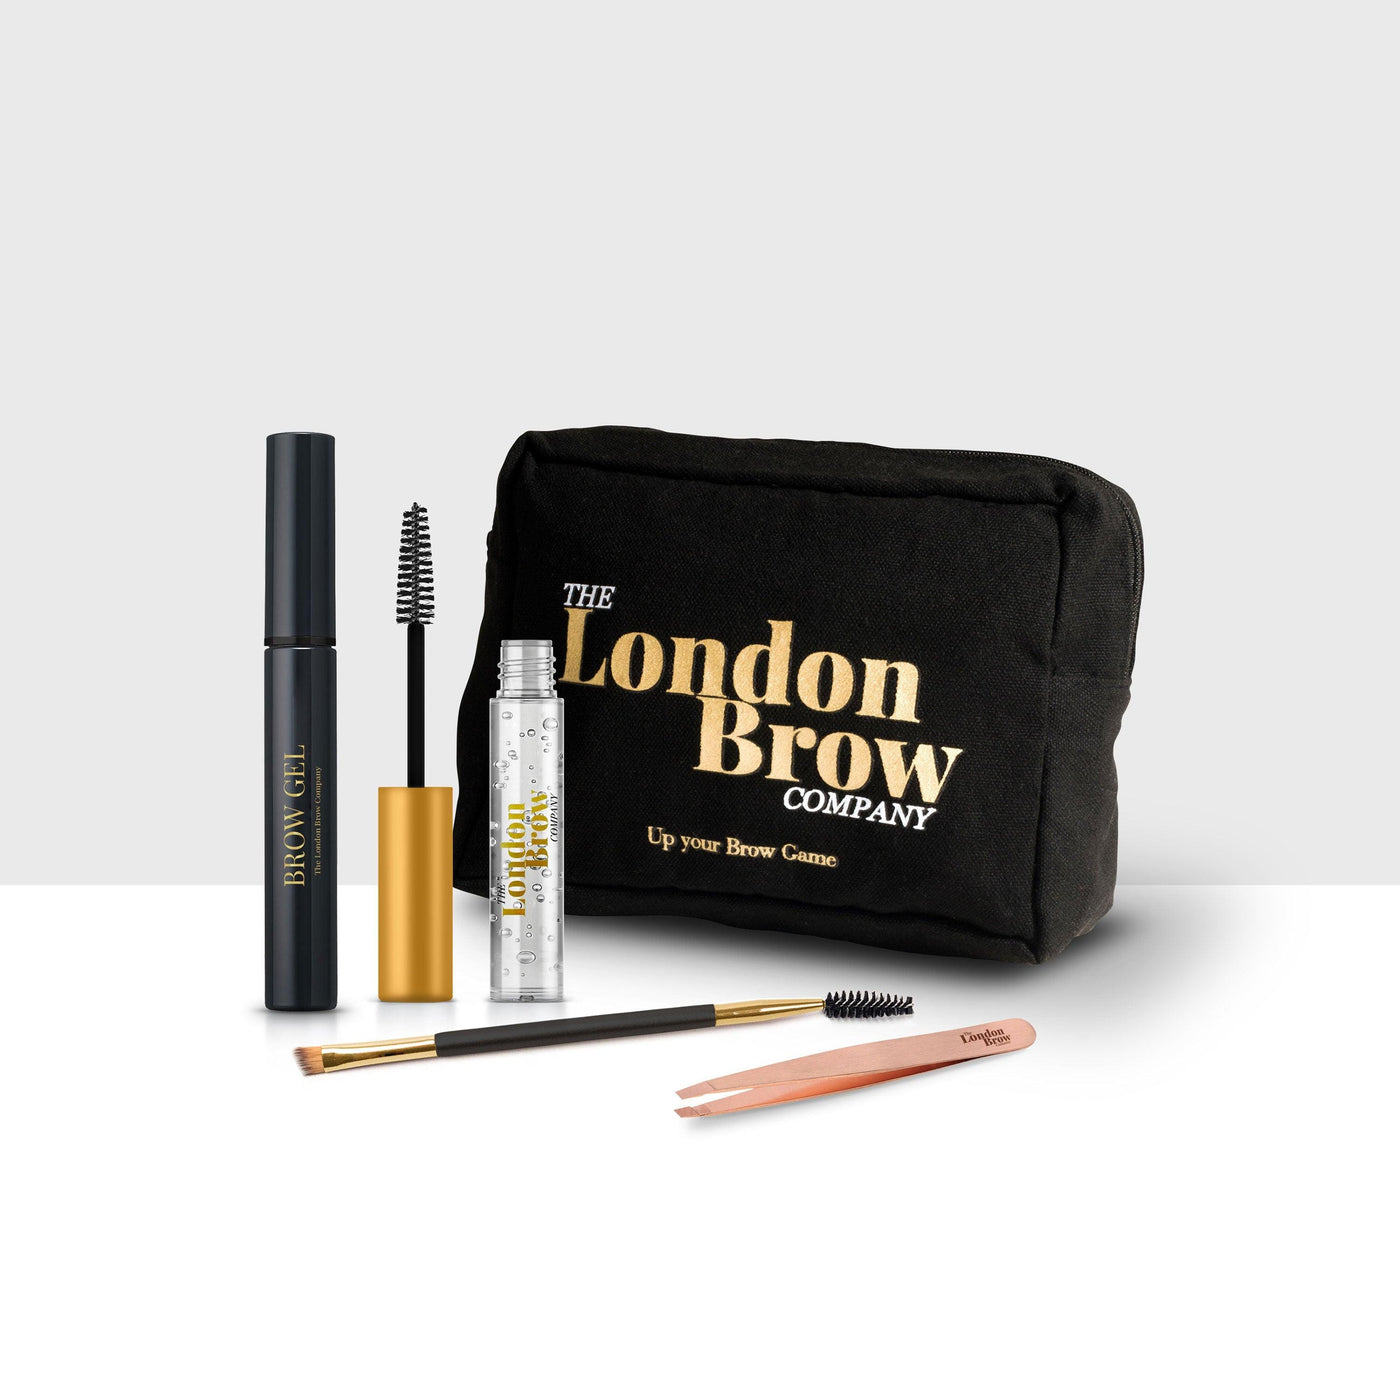 London Brow Bag: Essential Collection for Perfect Brow Aftercare - The London Brow Company